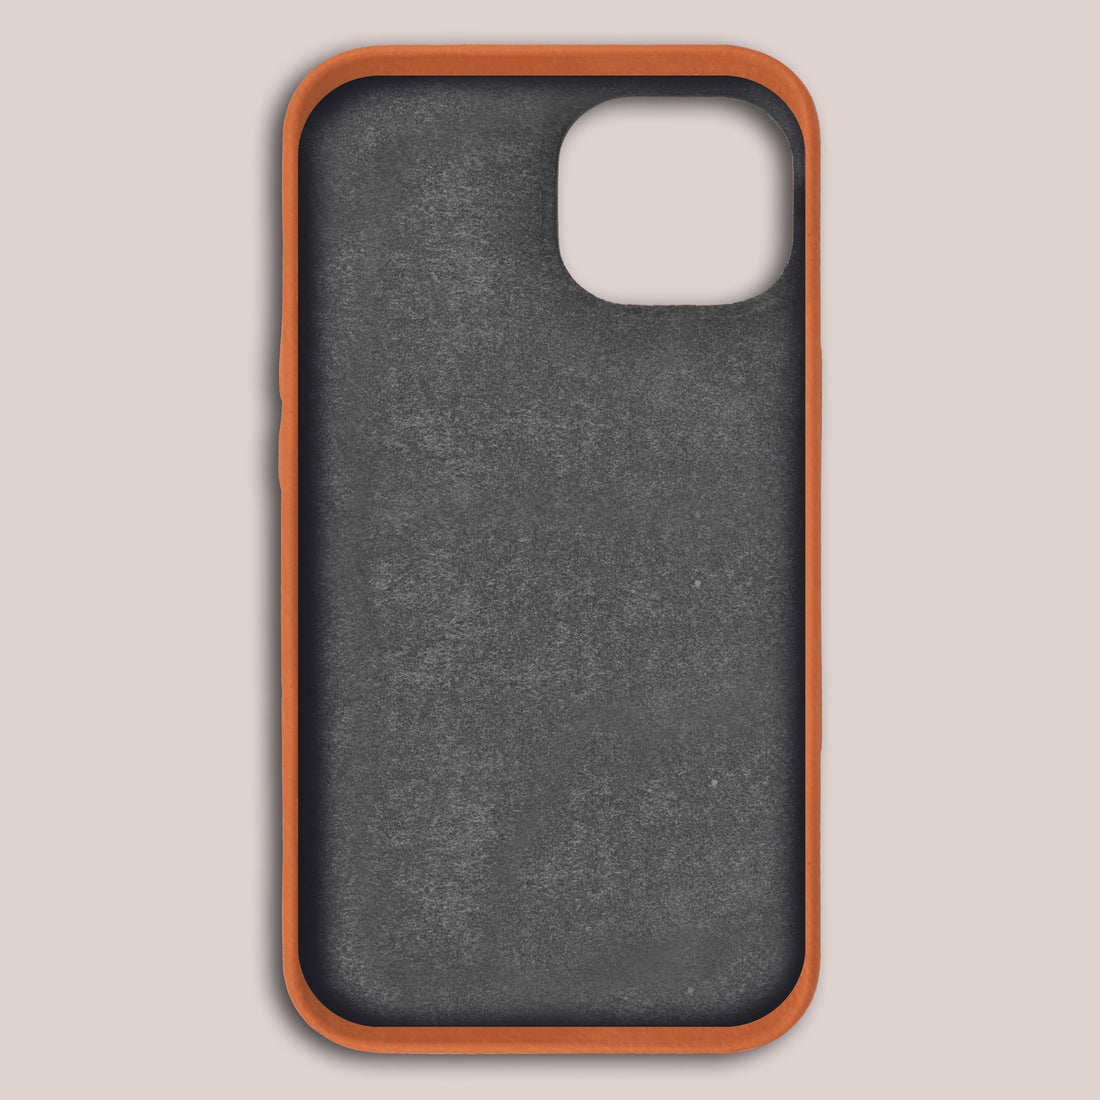 Baxter Card Case for iPhone 14 series - Onyx Black